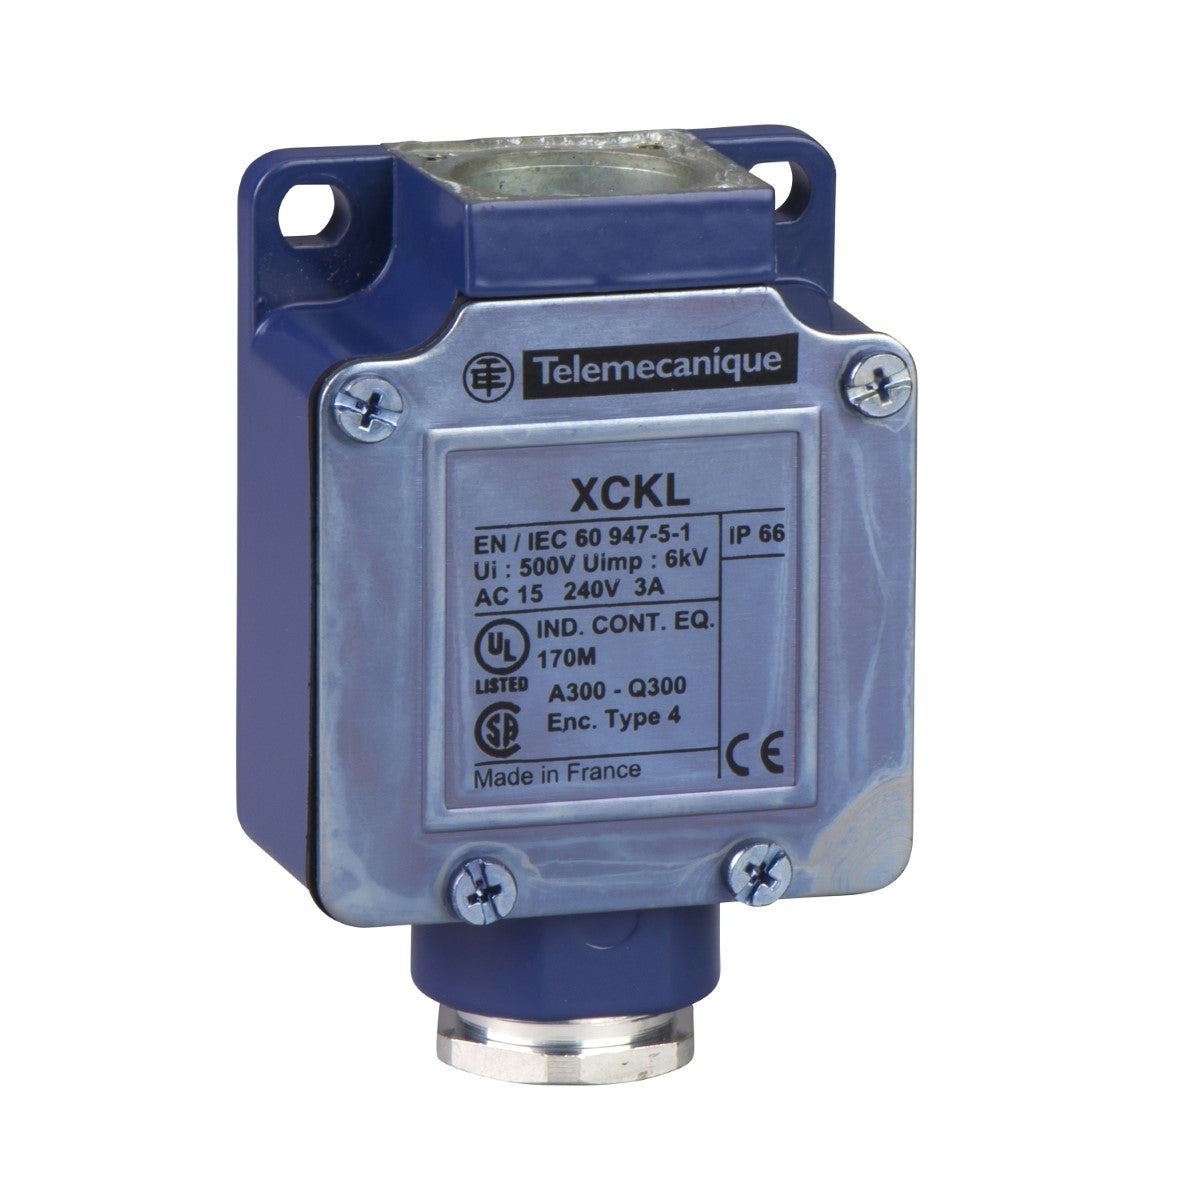 Limit switch body, Limit switches XC Standard, ZCKL, 1NC+1 NO, slow break, Cable gland include